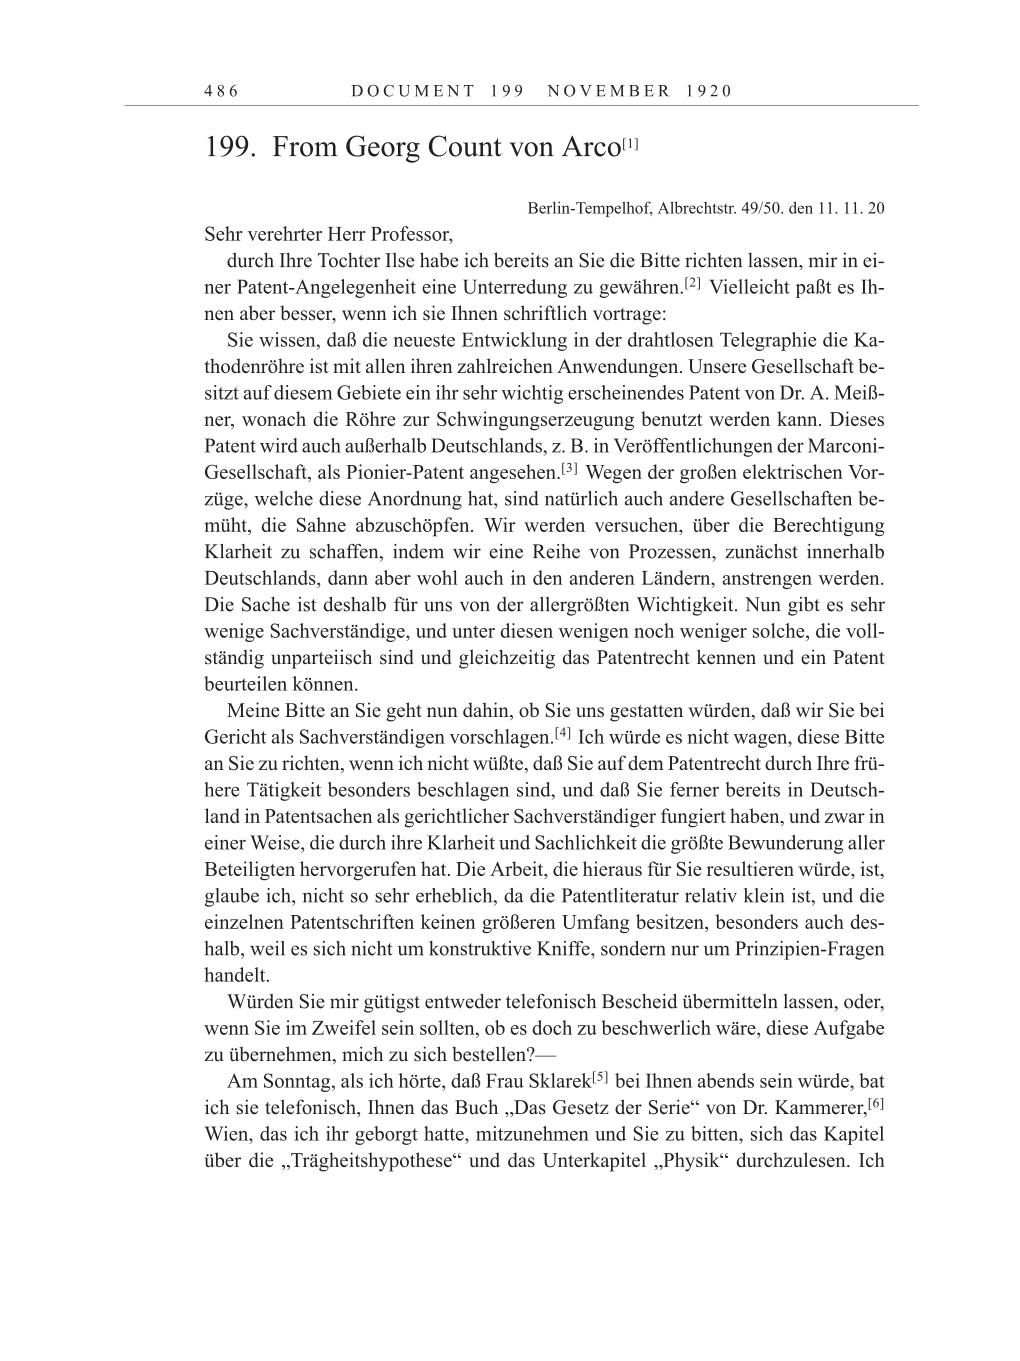 Volume 10: The Berlin Years: Correspondence May-December 1920 / Supplementary Correspondence 1909-1920 page 486